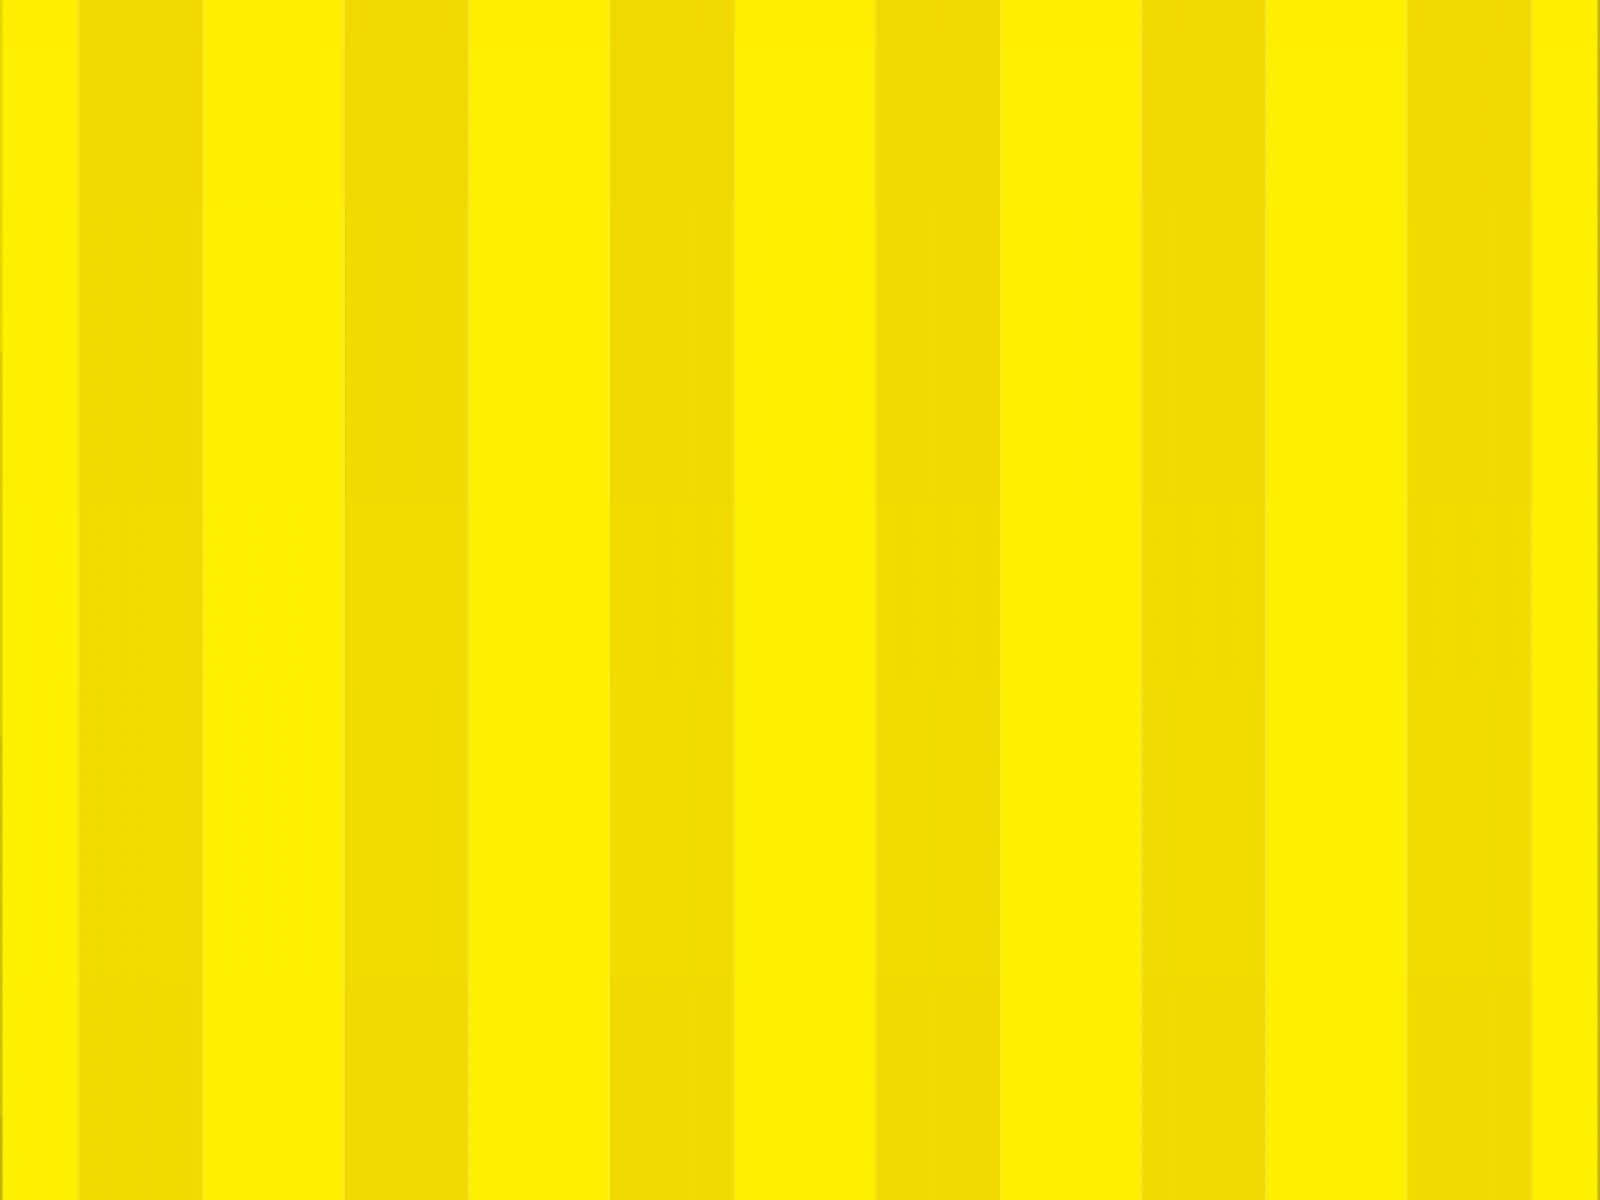 A Yellow Striped Background With White Stripes